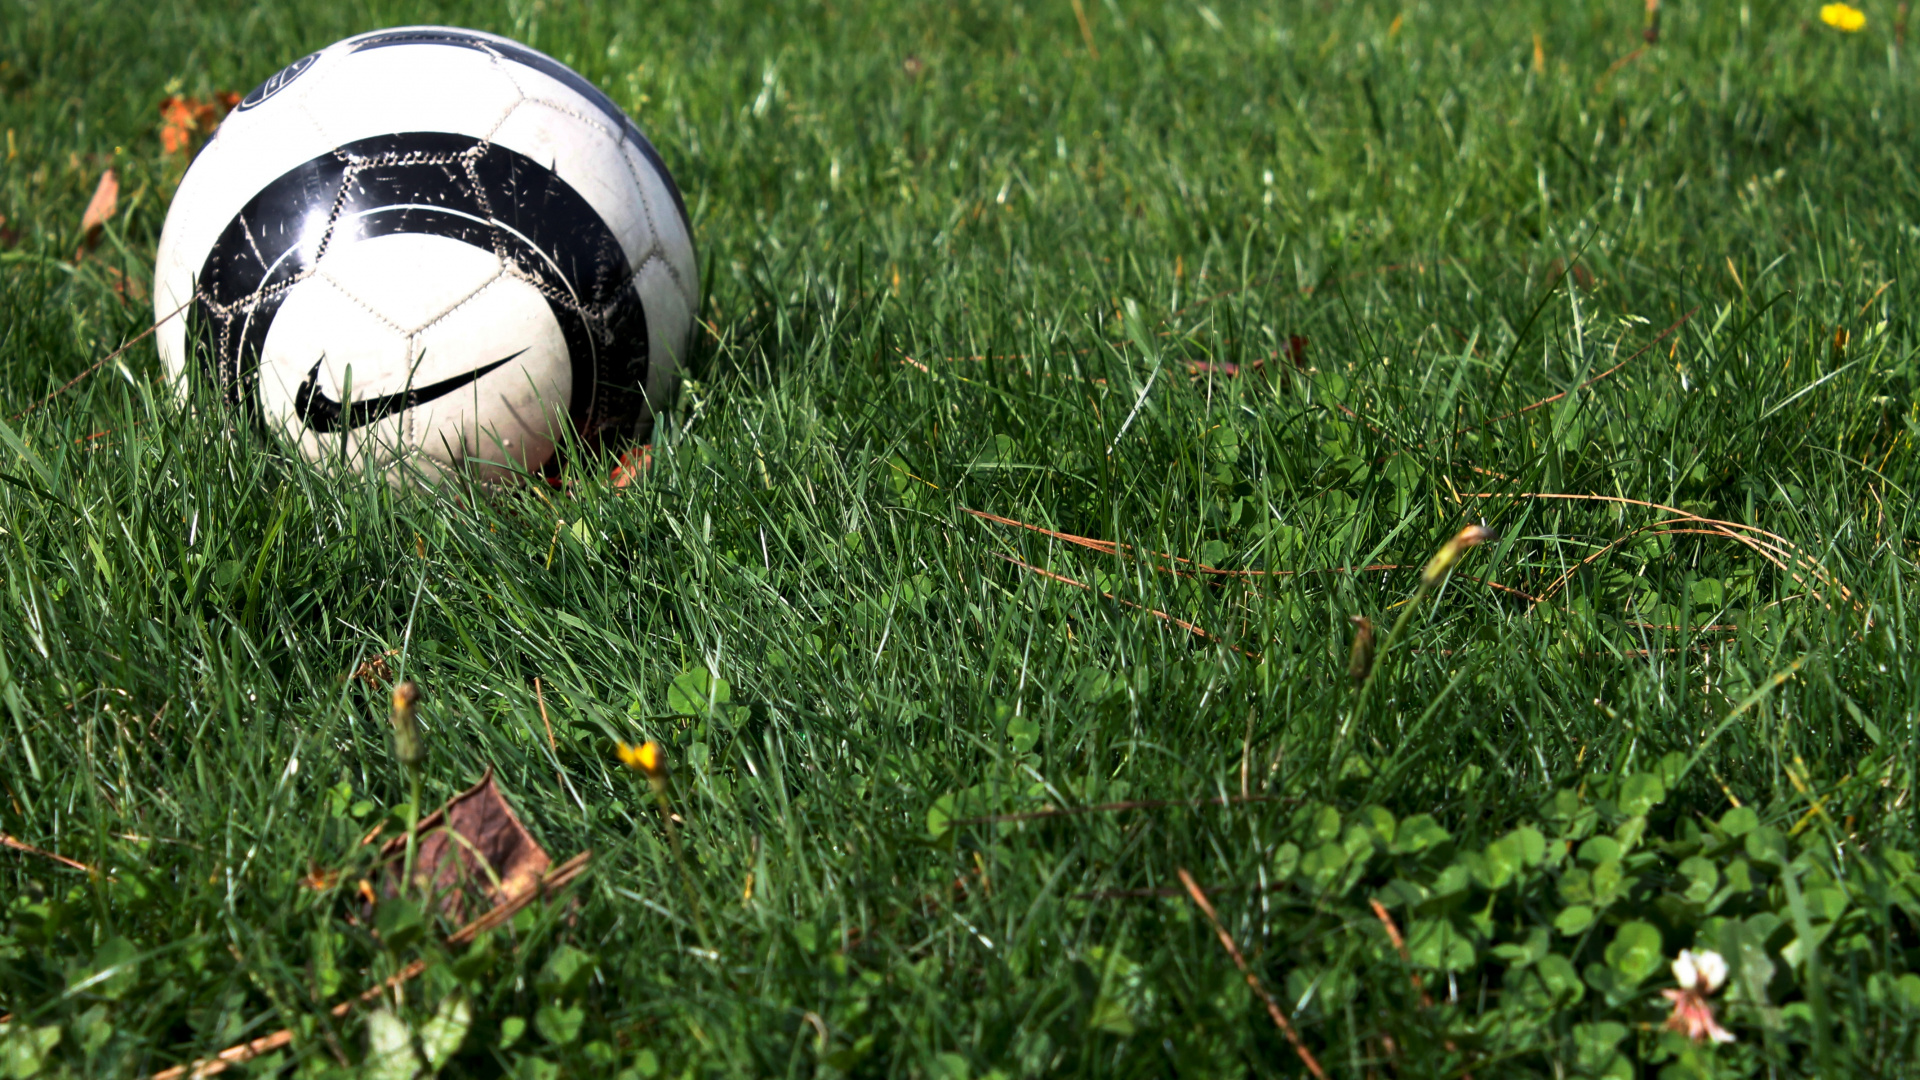 White and Black Soccer Ball on Green Grass Field. Wallpaper in 1920x1080 Resolution